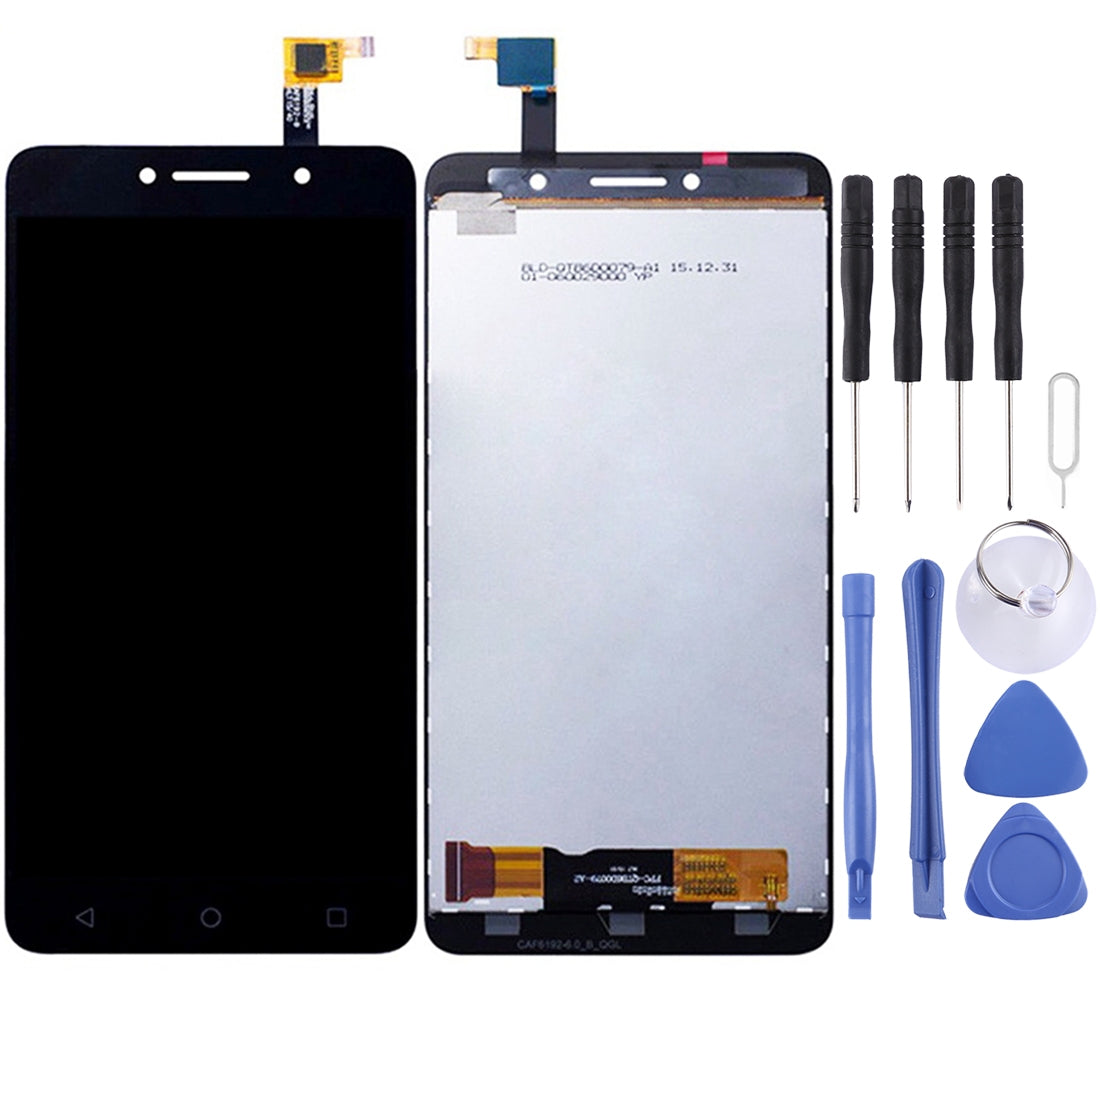 LCD Screen + Touch Digitizer Alcatel One Touch Pixi 4 6 3G ​​?? / 8050 Black